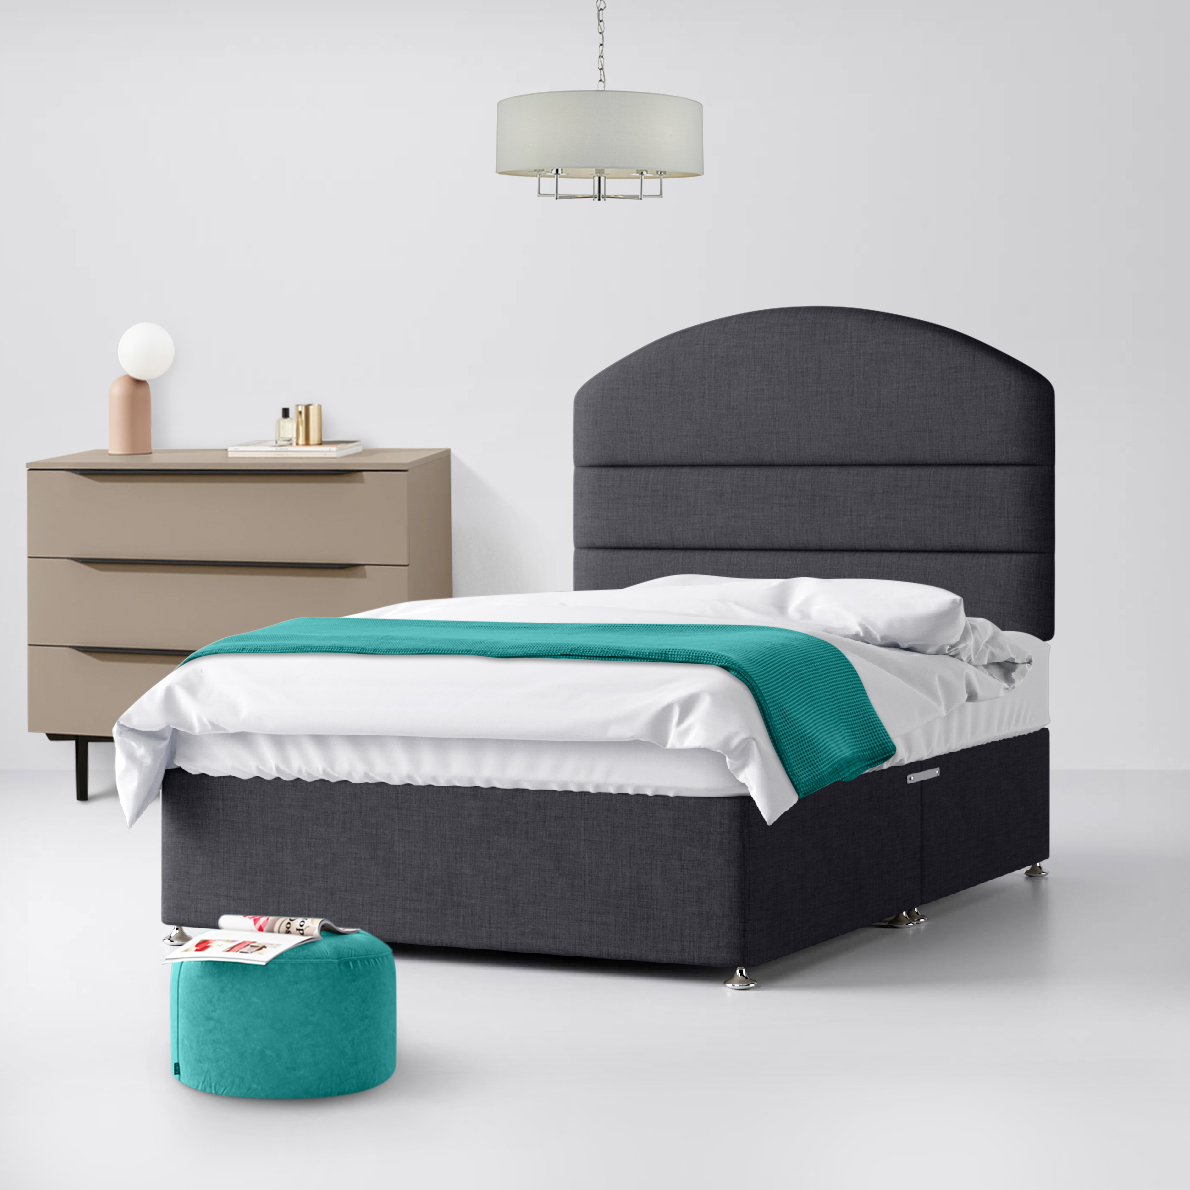 Small Double - Divan Bed and Dudley Lined Headboard - Dark Grey - Charcoal - Fabric - 4ft - Happy Beds